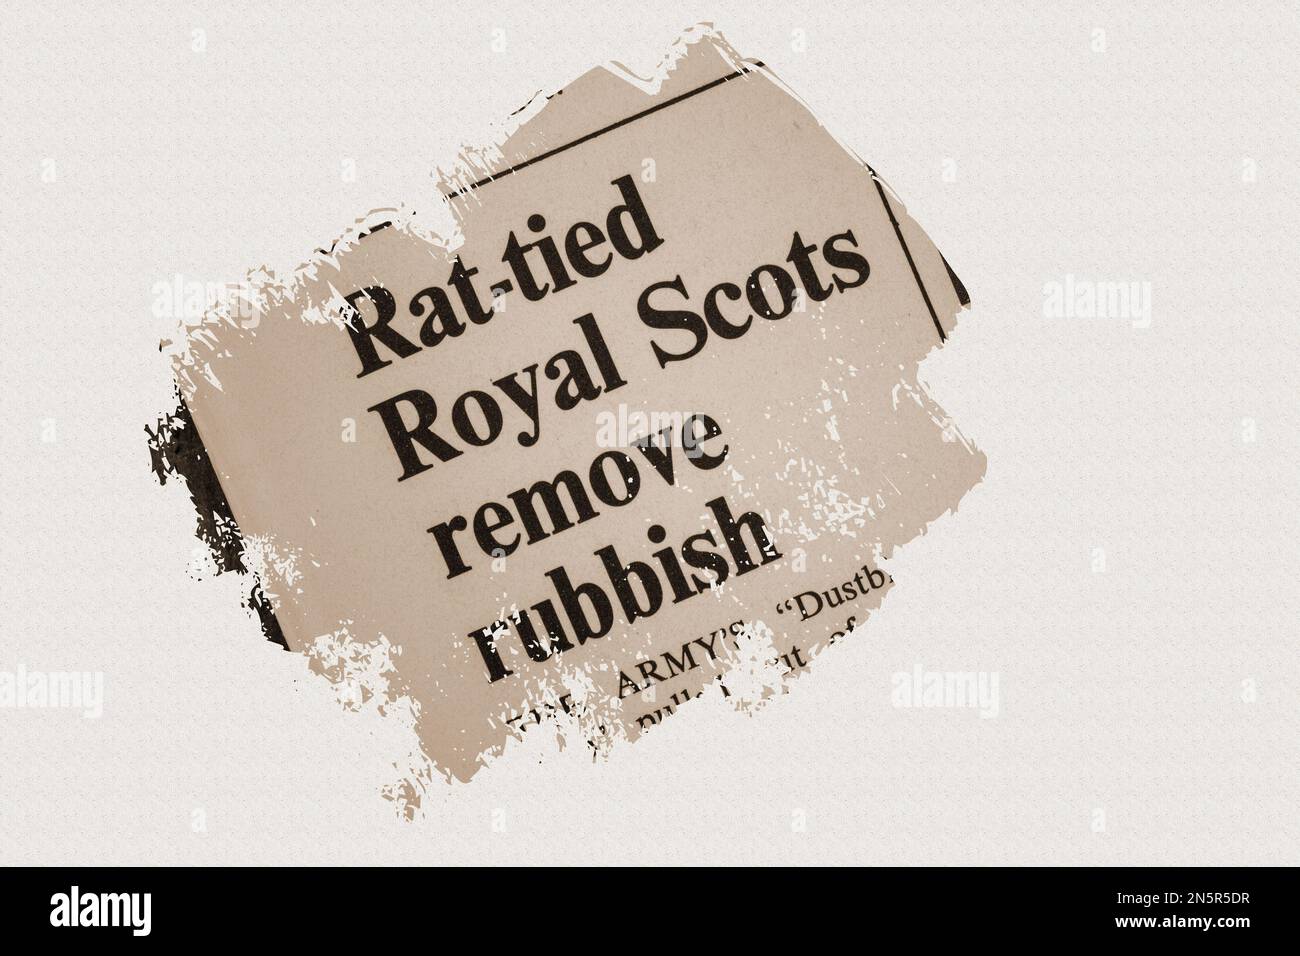 Rat-tied Royal Scots remove rubbish - news story from 1975 newspaper headline article title in sepia Stock Photo